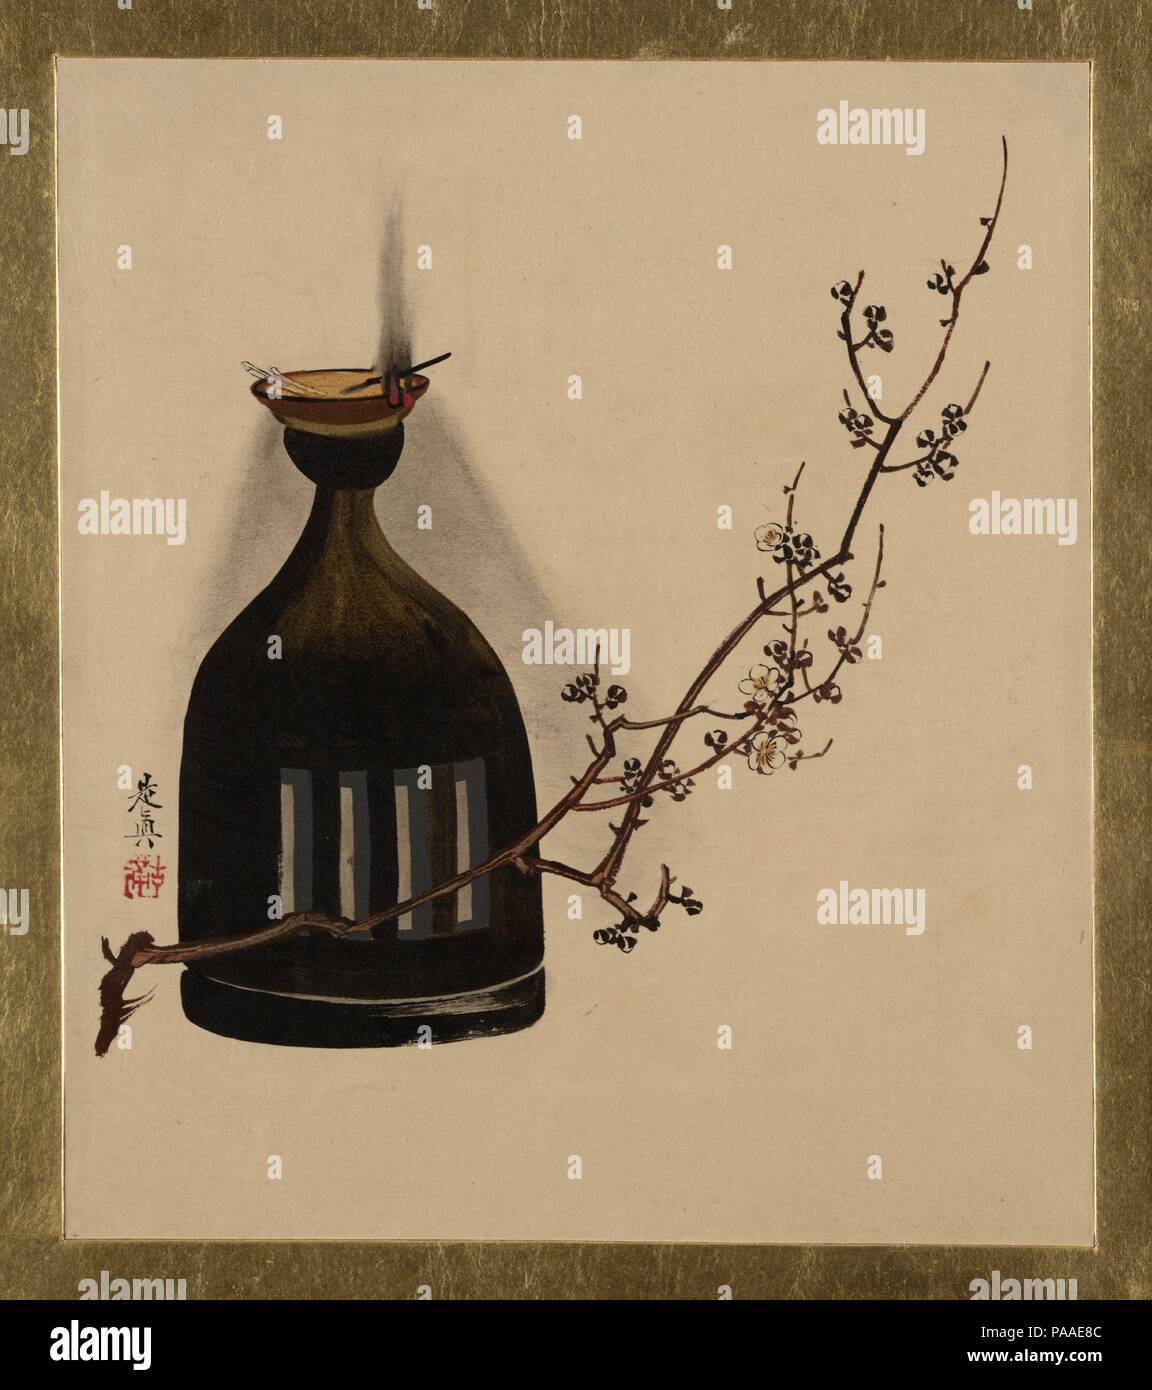 Lacquer Paintings of Various Subjects: Plum Branch with Oil Lamp. Artist: Shibata Zeshin (Japanese, 1807-1891). Culture: Japan. Dimensions: 7 1/2 x 6 1/2 in. (19.1 x 16.5 cm). Date: 1882.  Well known in the West as a painter and a lacquer artist, Shibata Zeshin enjoyed longevity in both his life and his career. At age eleven, he began an apprenticeship with the leading lacquer artist, Koma Kan'ya (Kansai II, 1767-1835); at sixteen, he began to study painting under Suzuki Narei (1795-1844) of the Shijo school. The paintings in this album reflect his early training and longtime involvement as a  Stock Photo